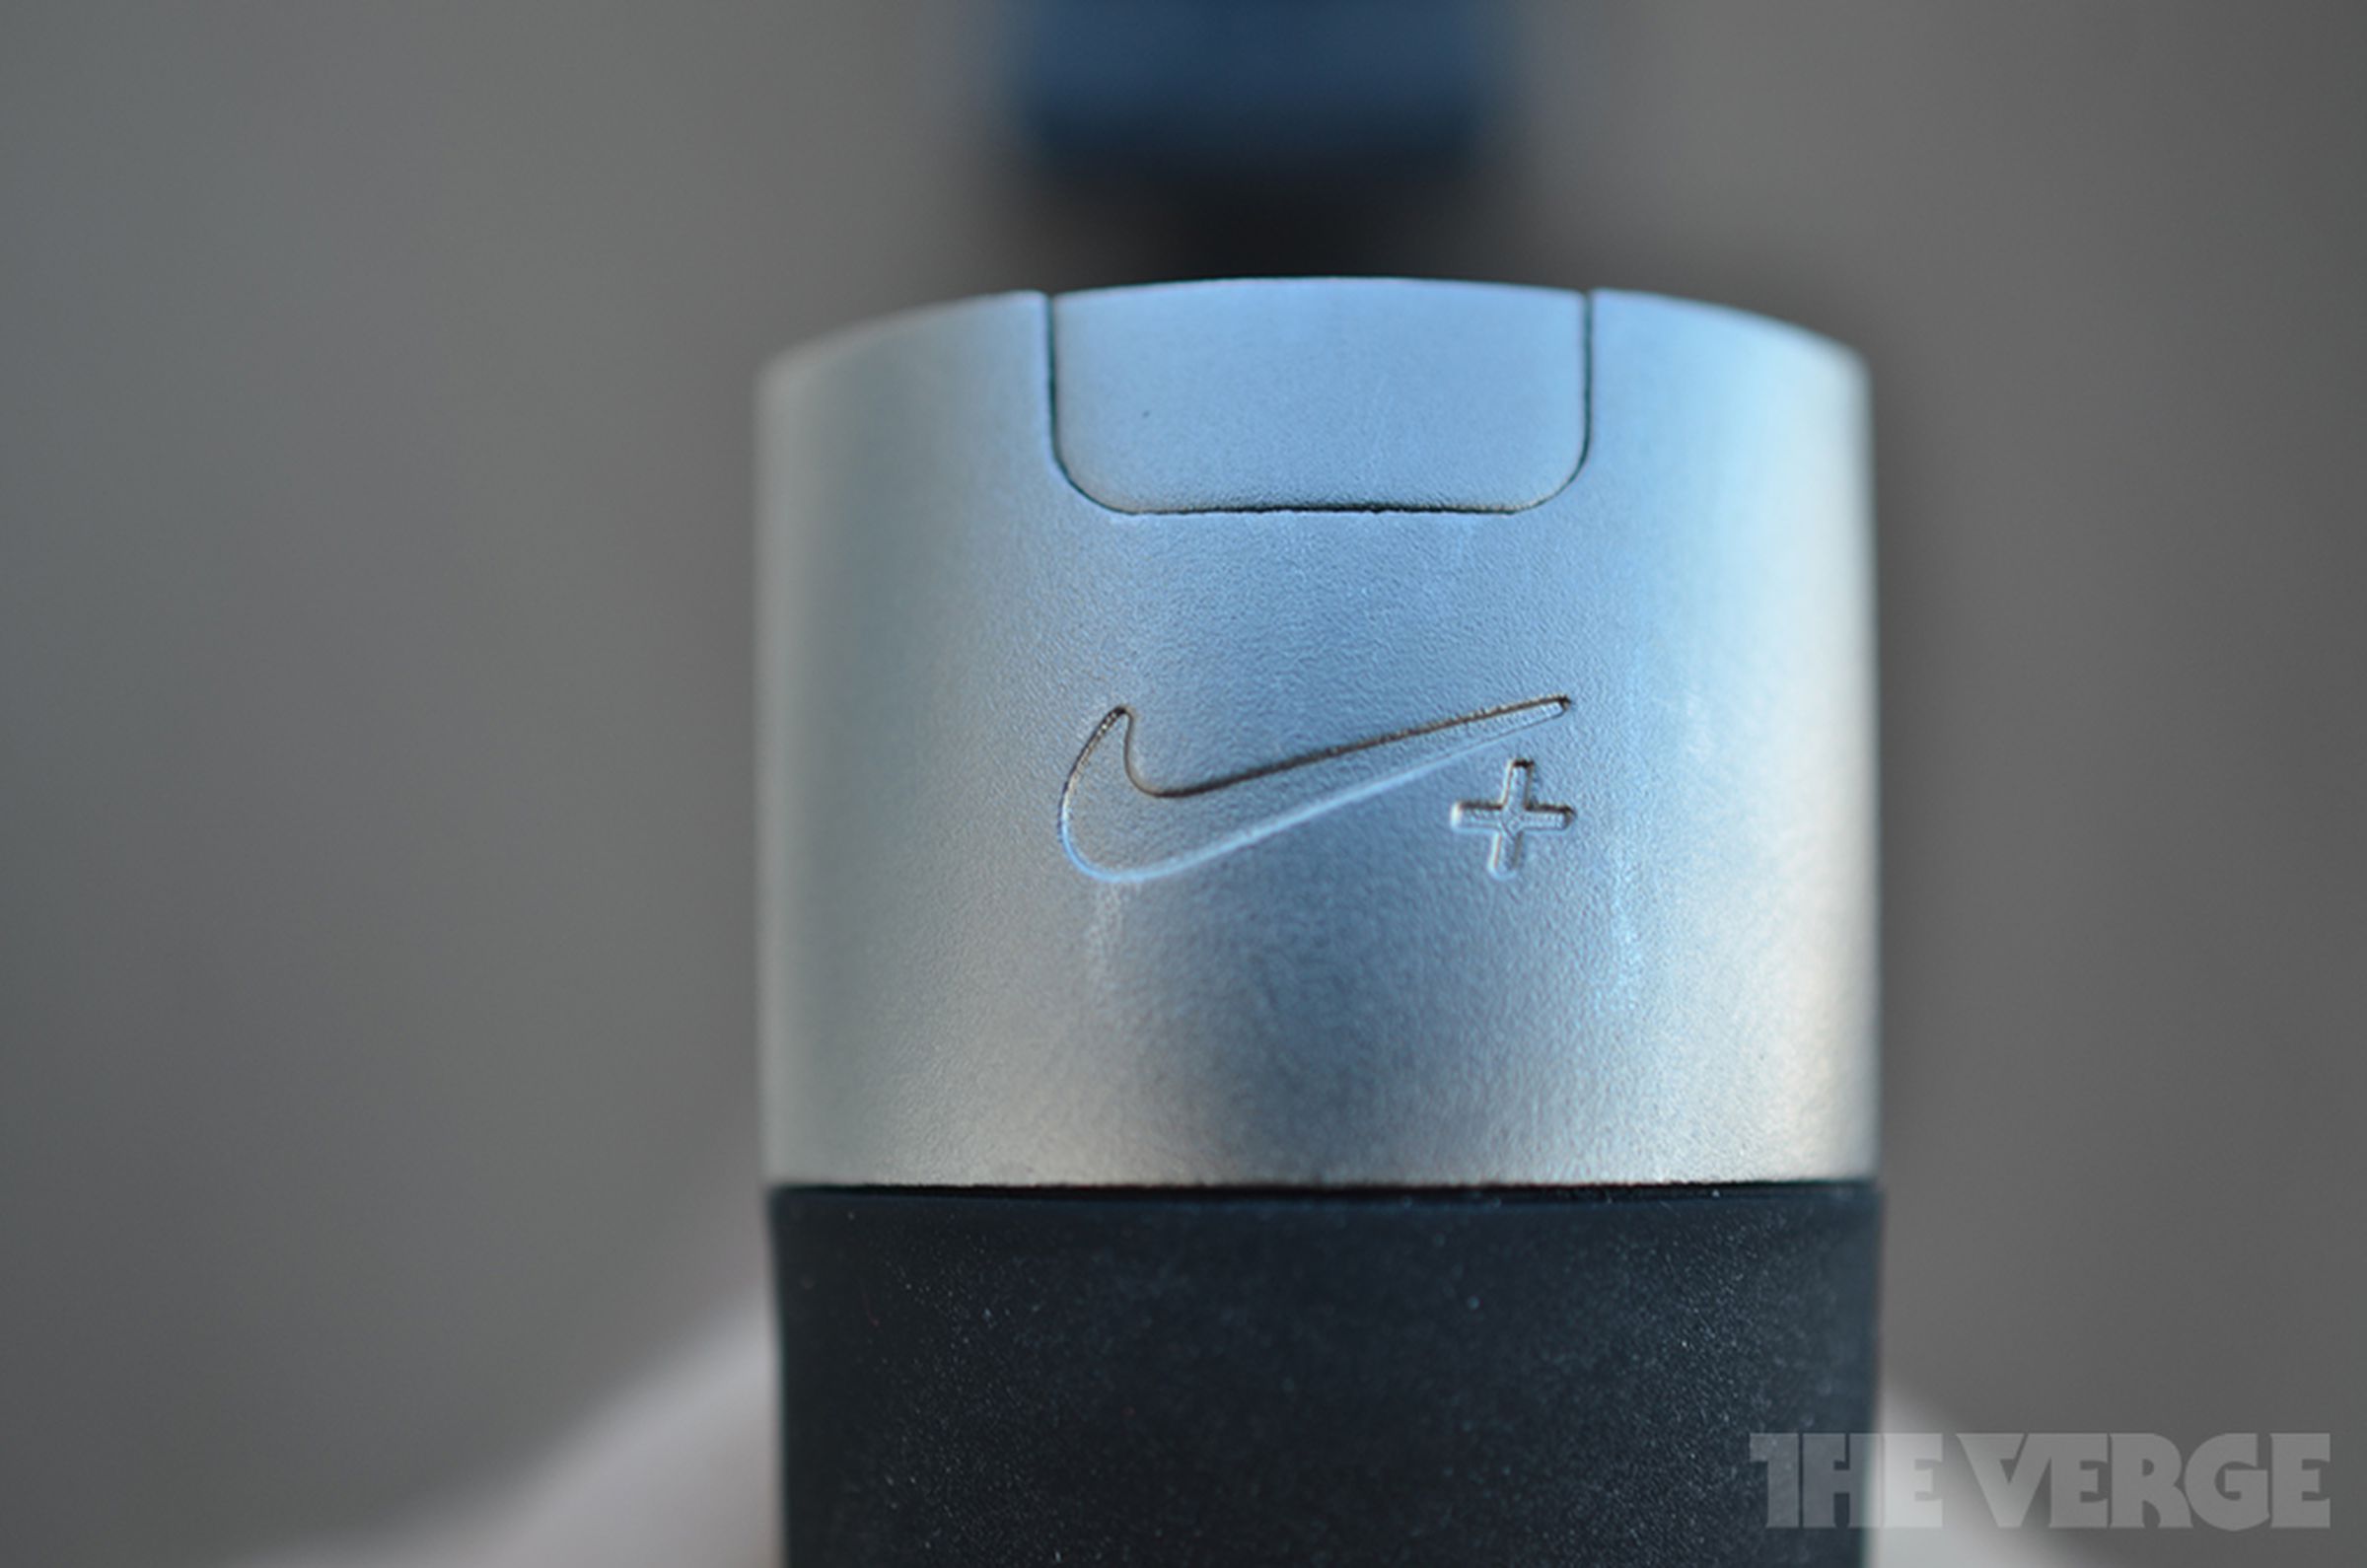 Nike+ FuelBand review pictures